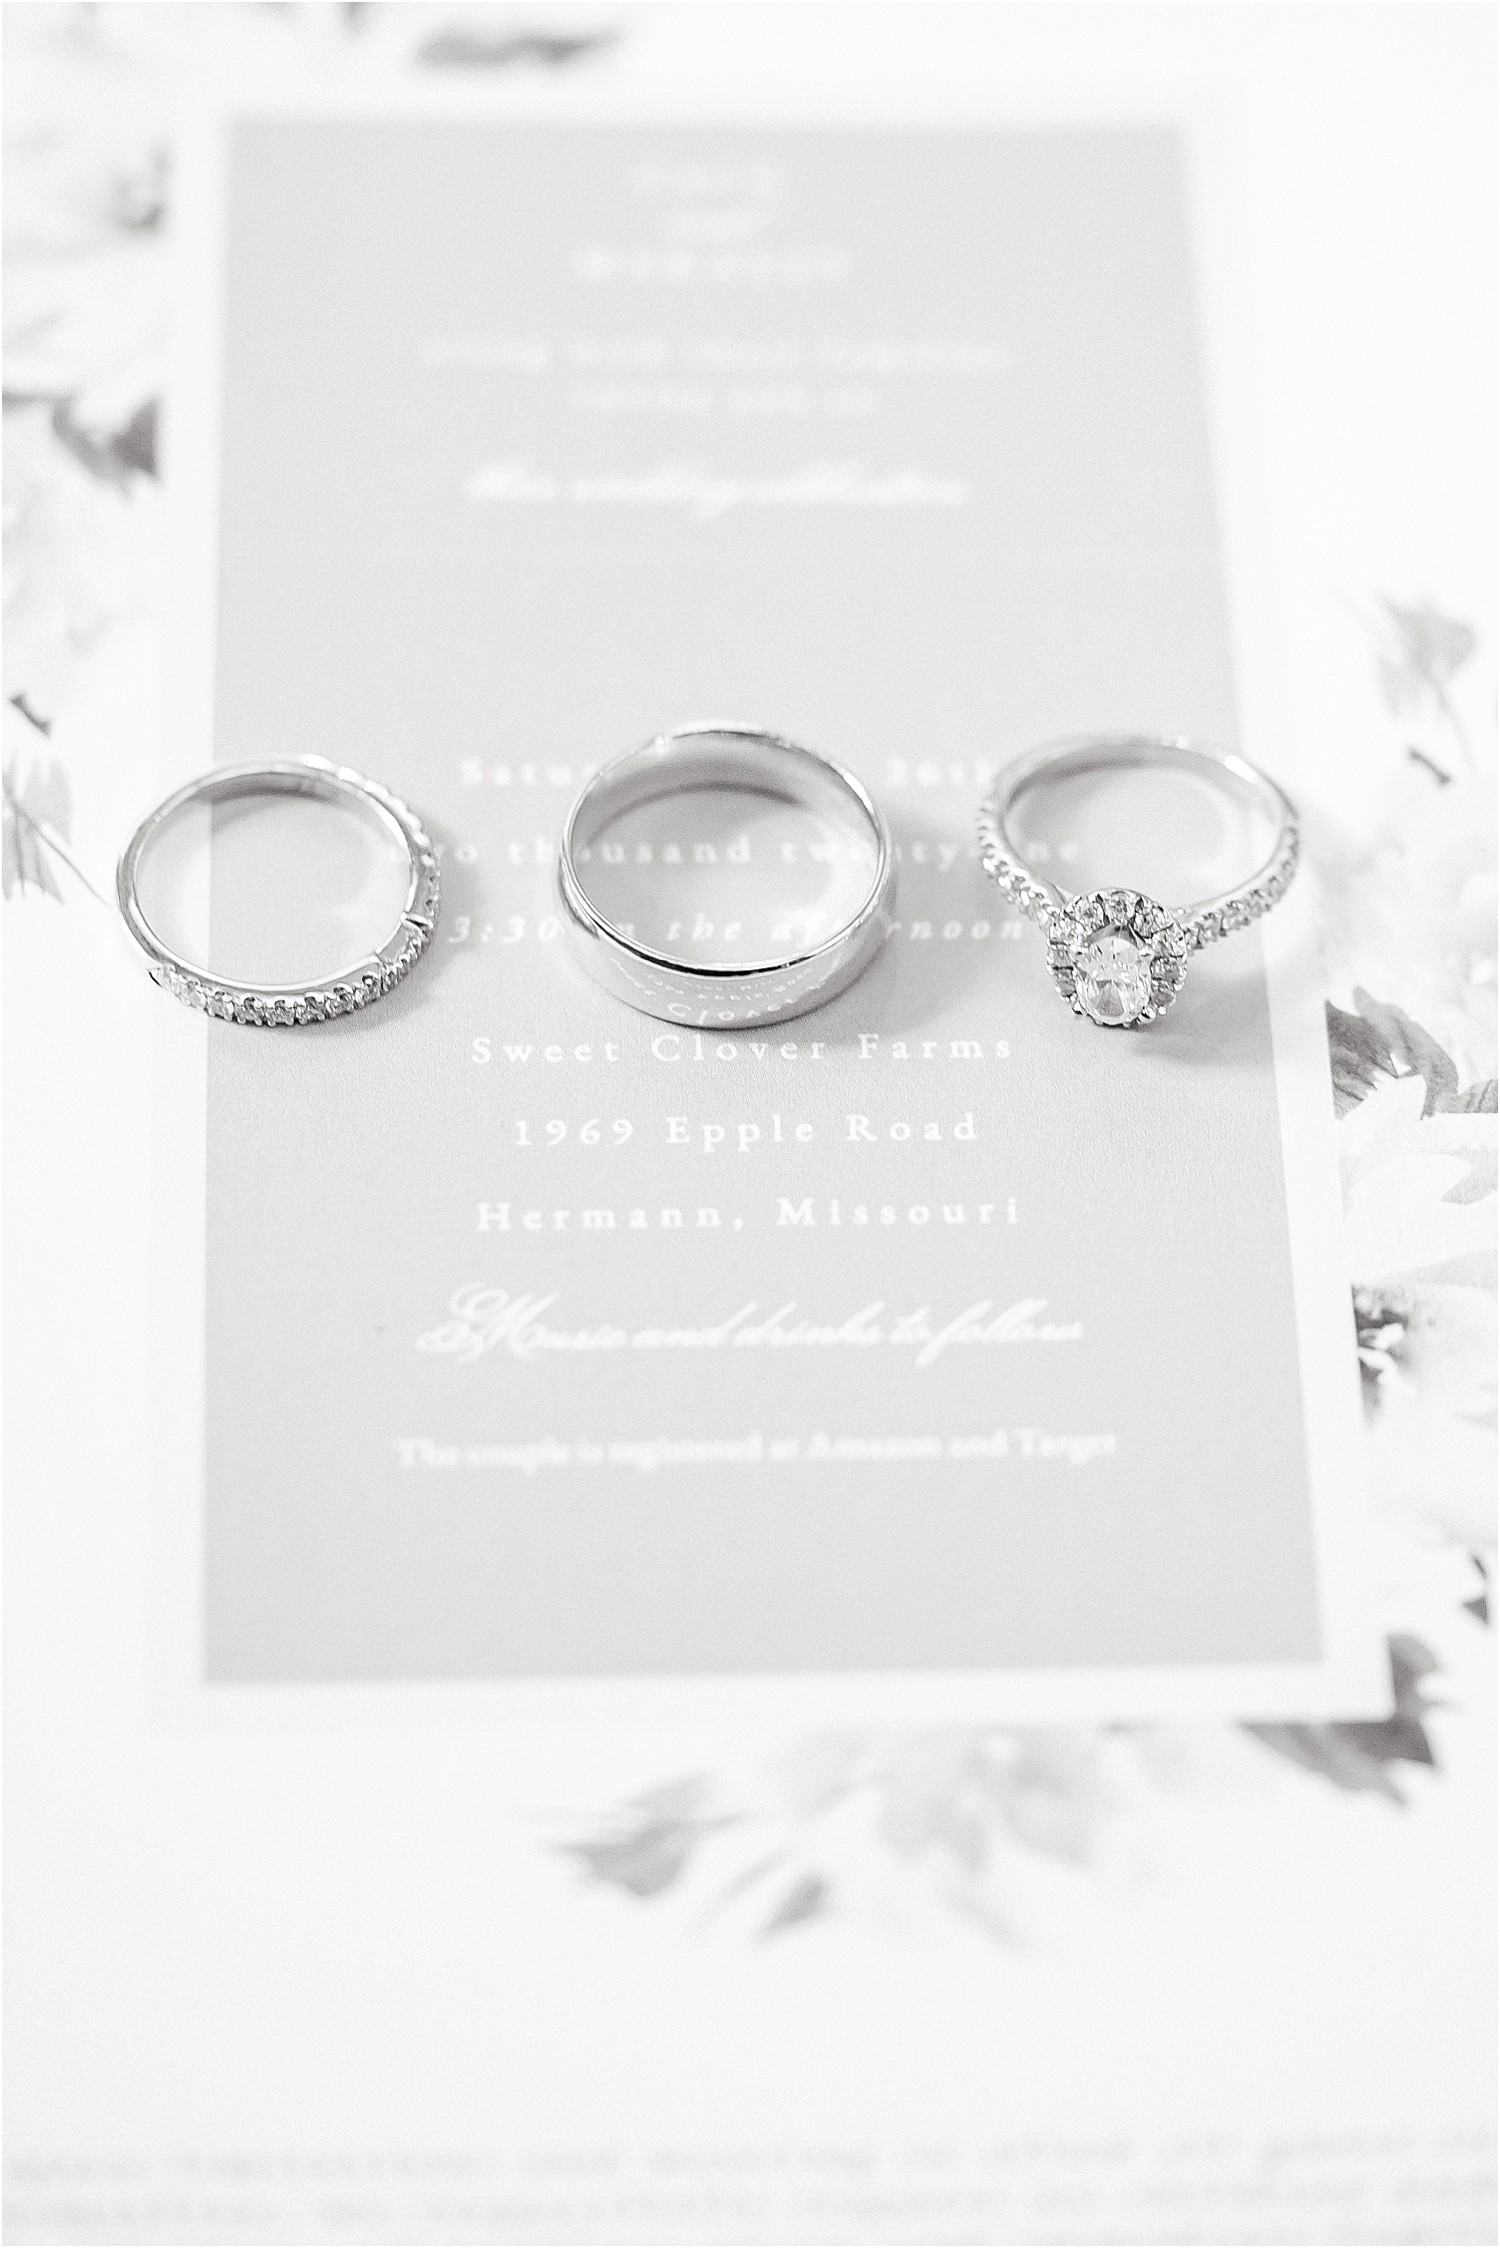 black and white image of three wedding rings on a wedding invitation